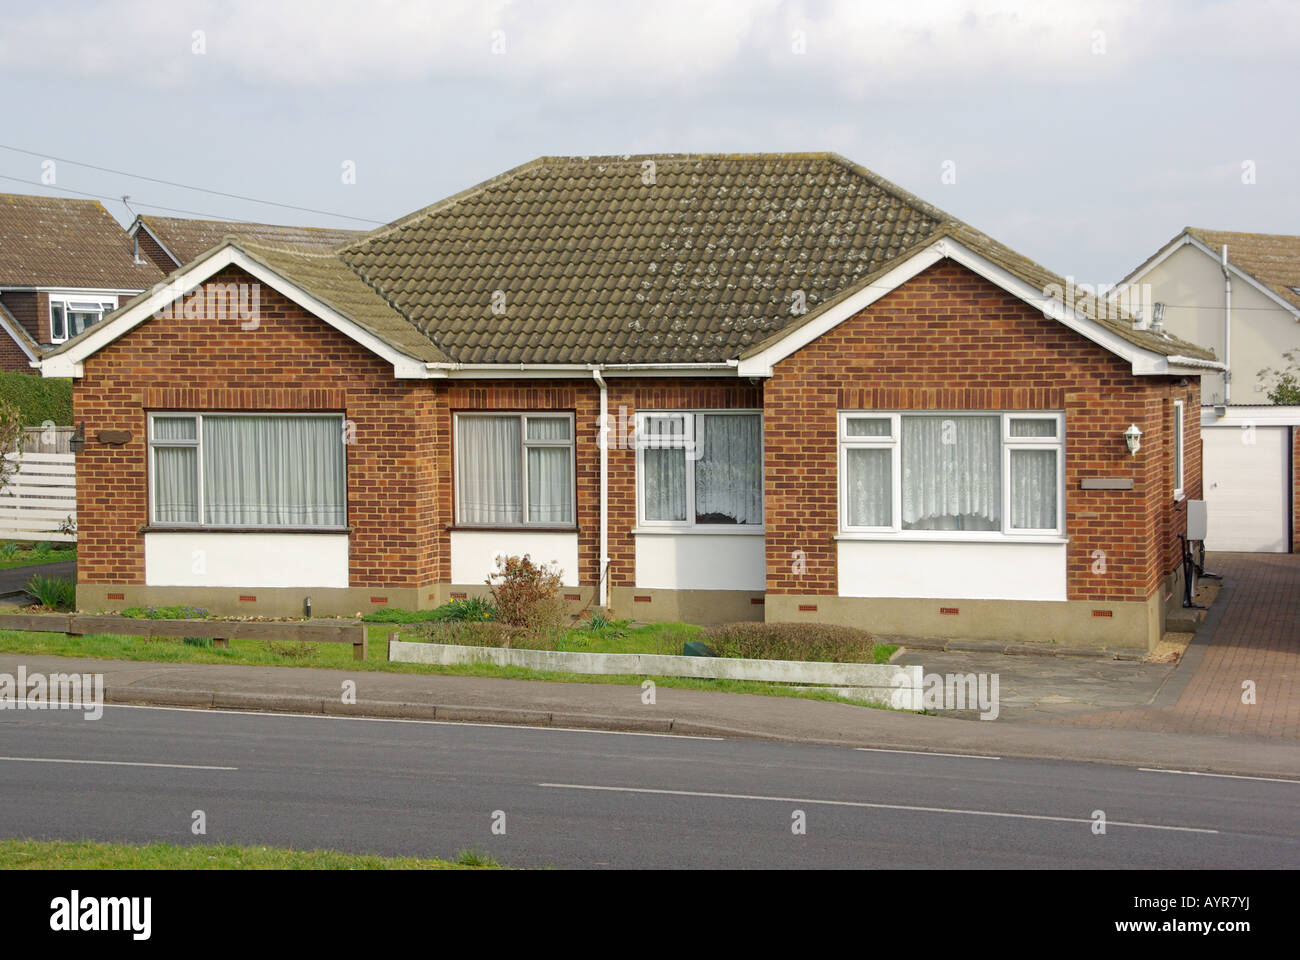 Pair semi detached bungalows and front garden Stock Photo